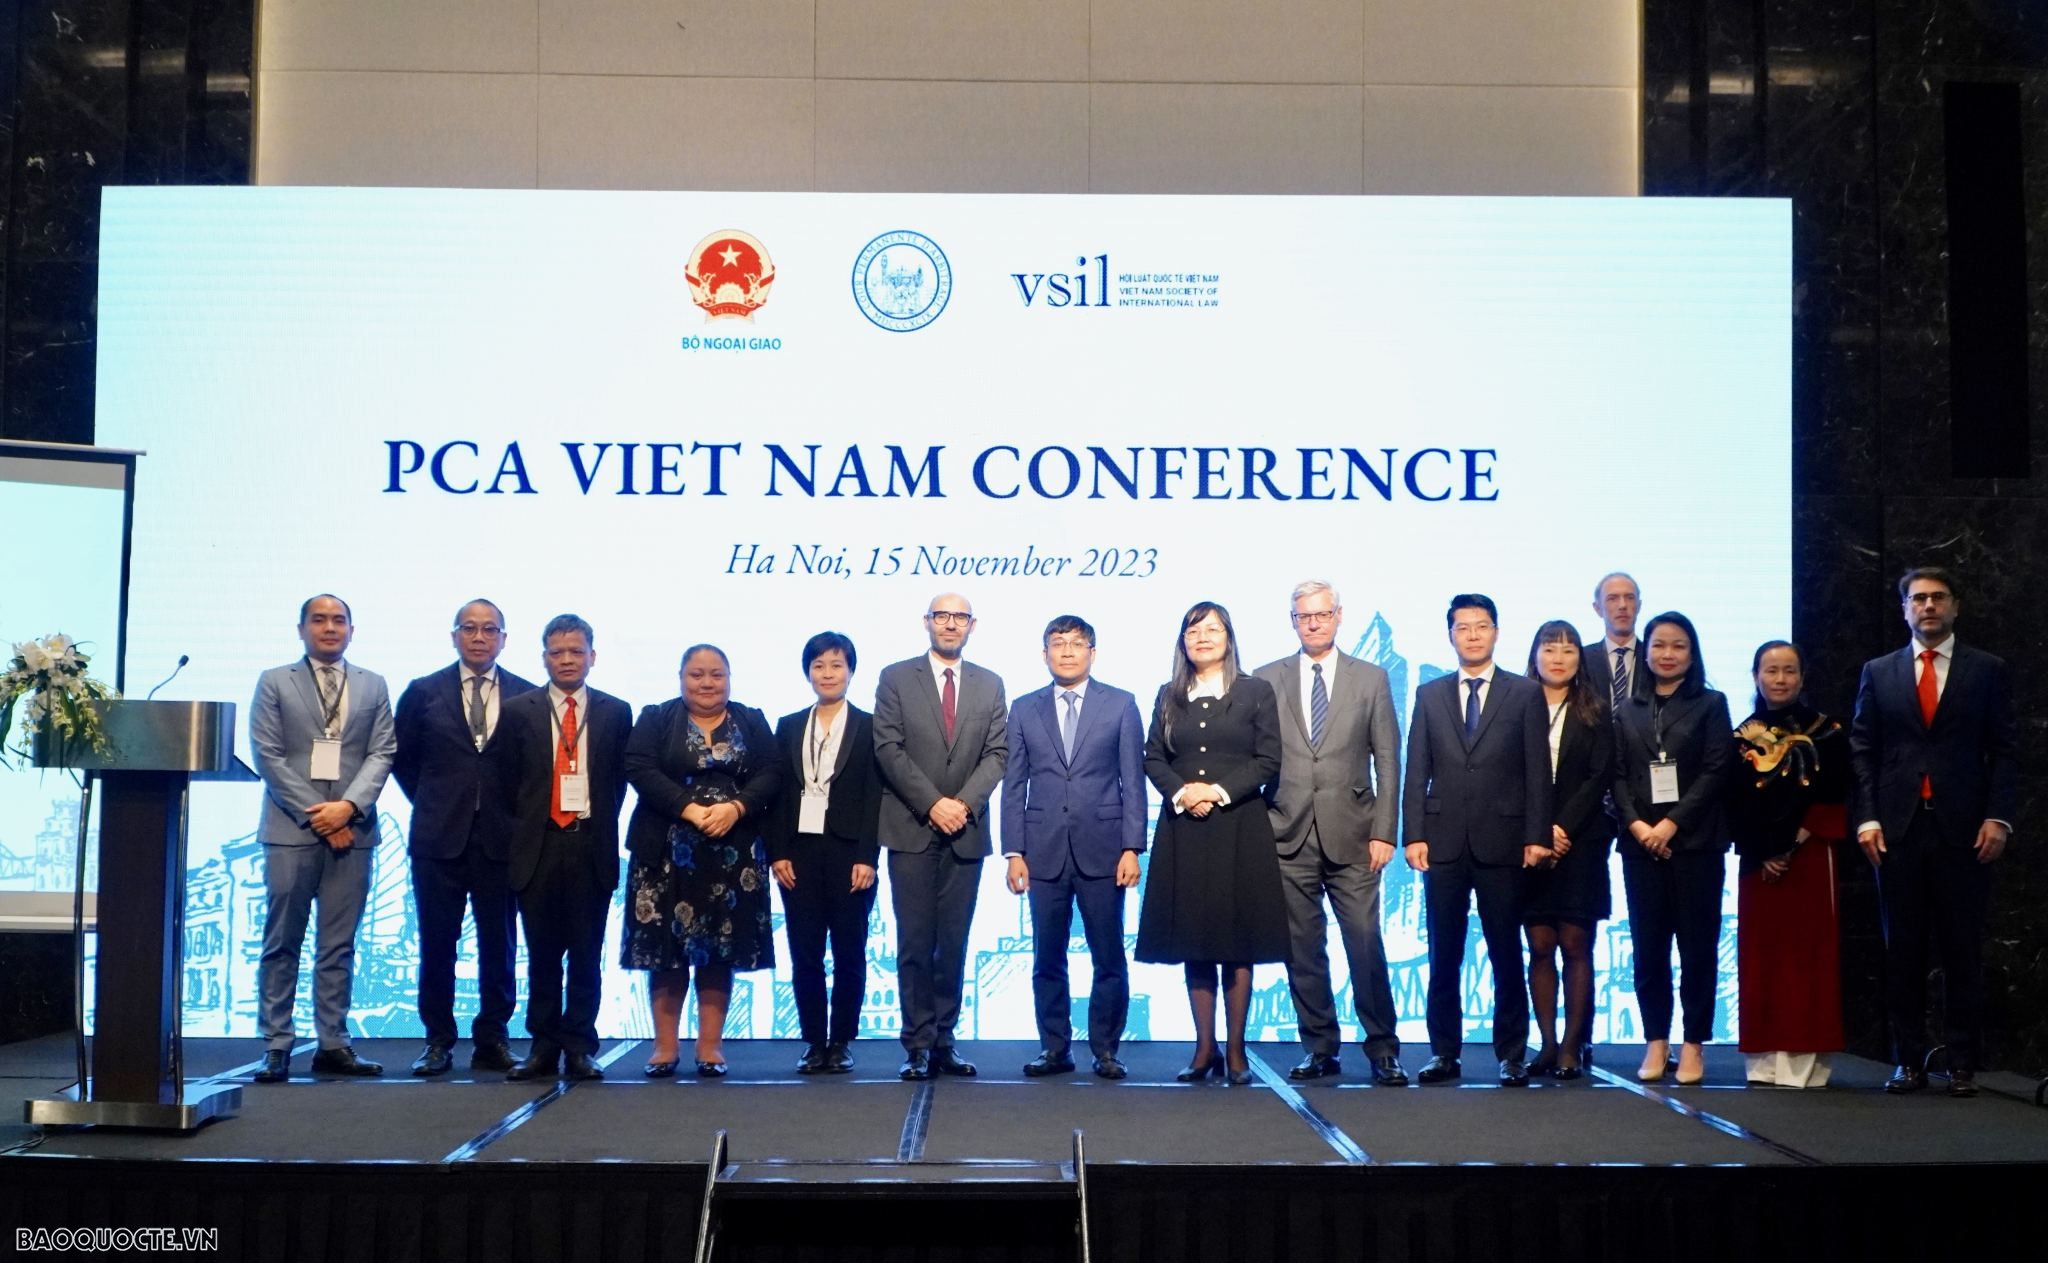 An opportunity to effectively connect Vietnamese legal community and international partners